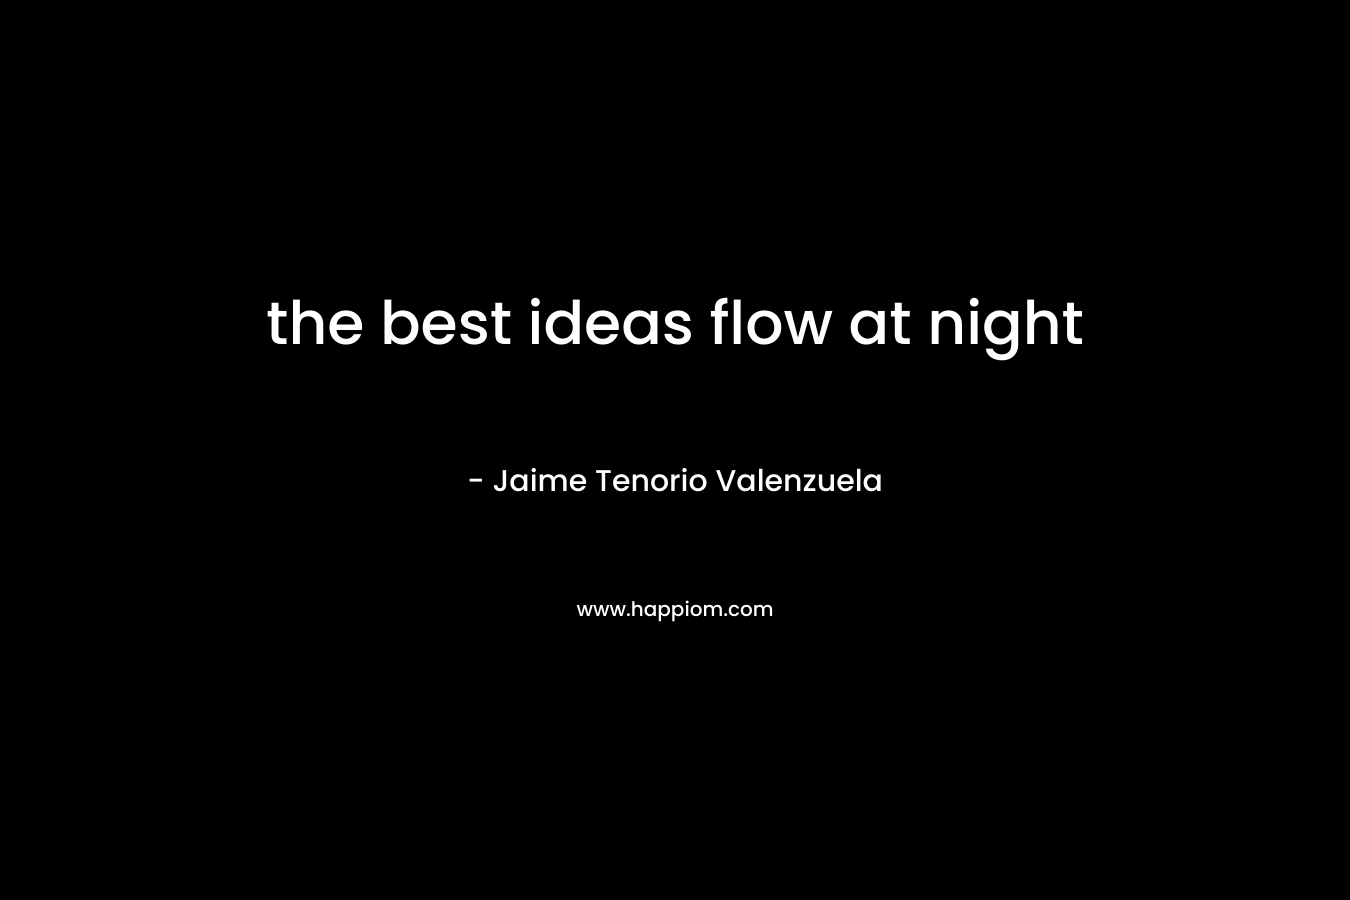 the best ideas flow at night